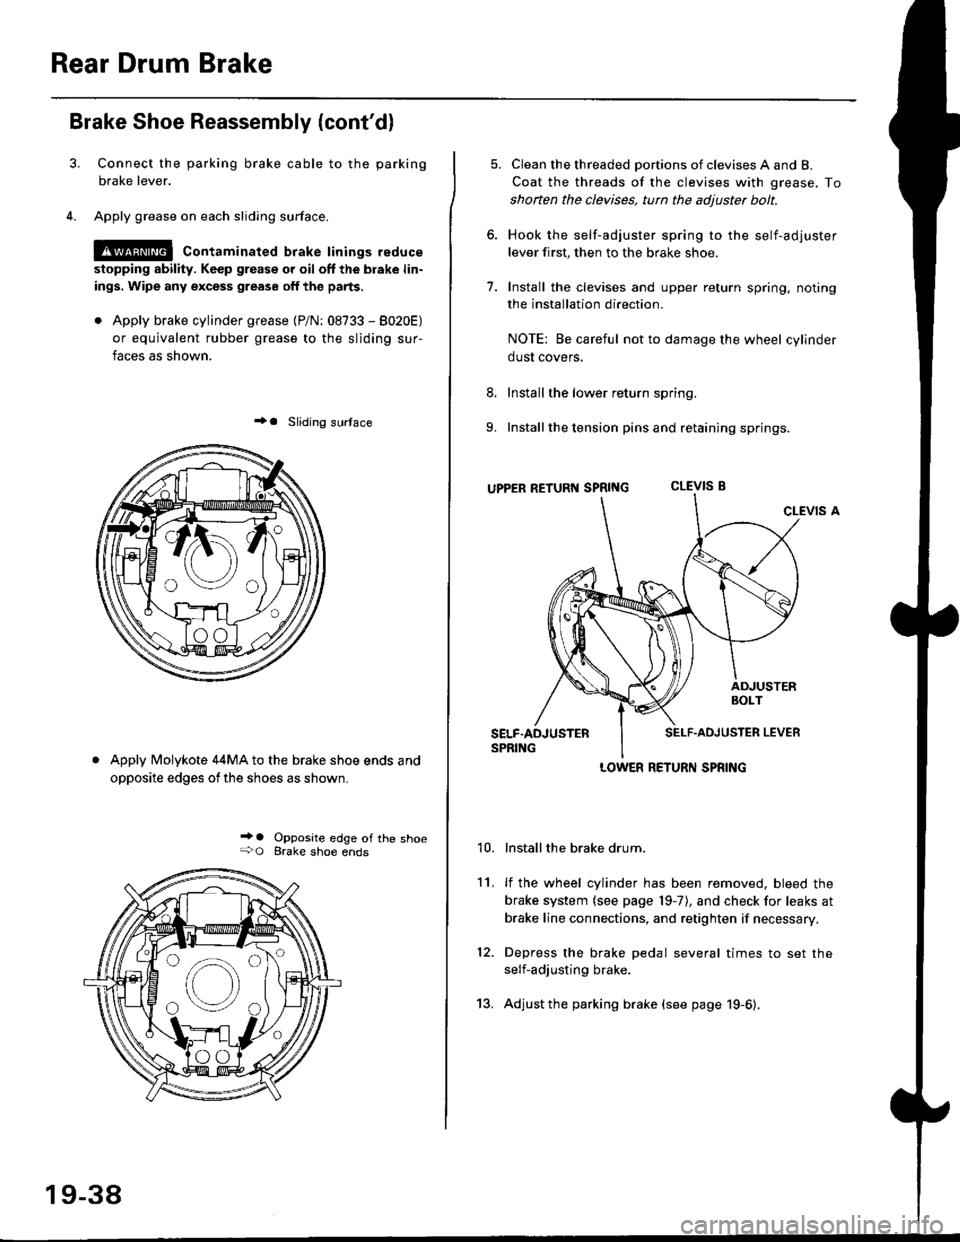 HONDA CIVIC 1996 6.G Service Manual Rear Drum Brake
Brake Shoe Reassembly {contdl
Connect the parking brake cable to the parking
brake lever.
Apply grease on each sliding surface.
!@ contaminated brake linings reduce
stopping ability. 